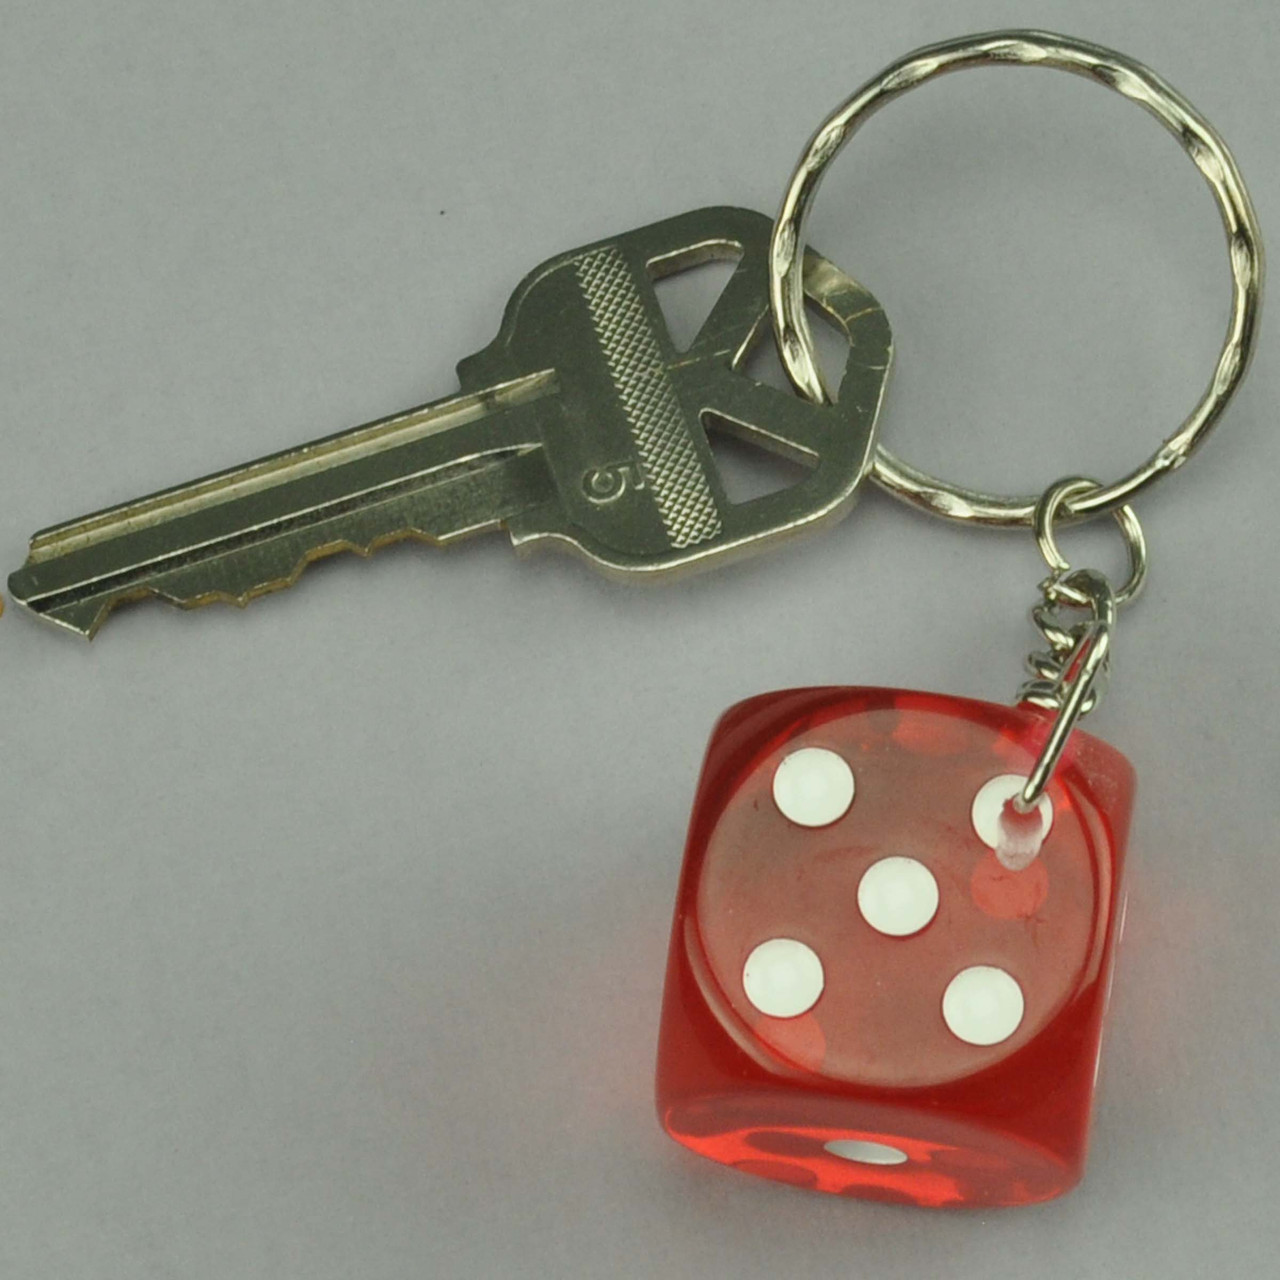 Dice Key Chain Metal Personality Dice Model Alloy Key Chain Gift Stainless  Steel Good Luck Car Key Ring, Check Out Today's Deals Now